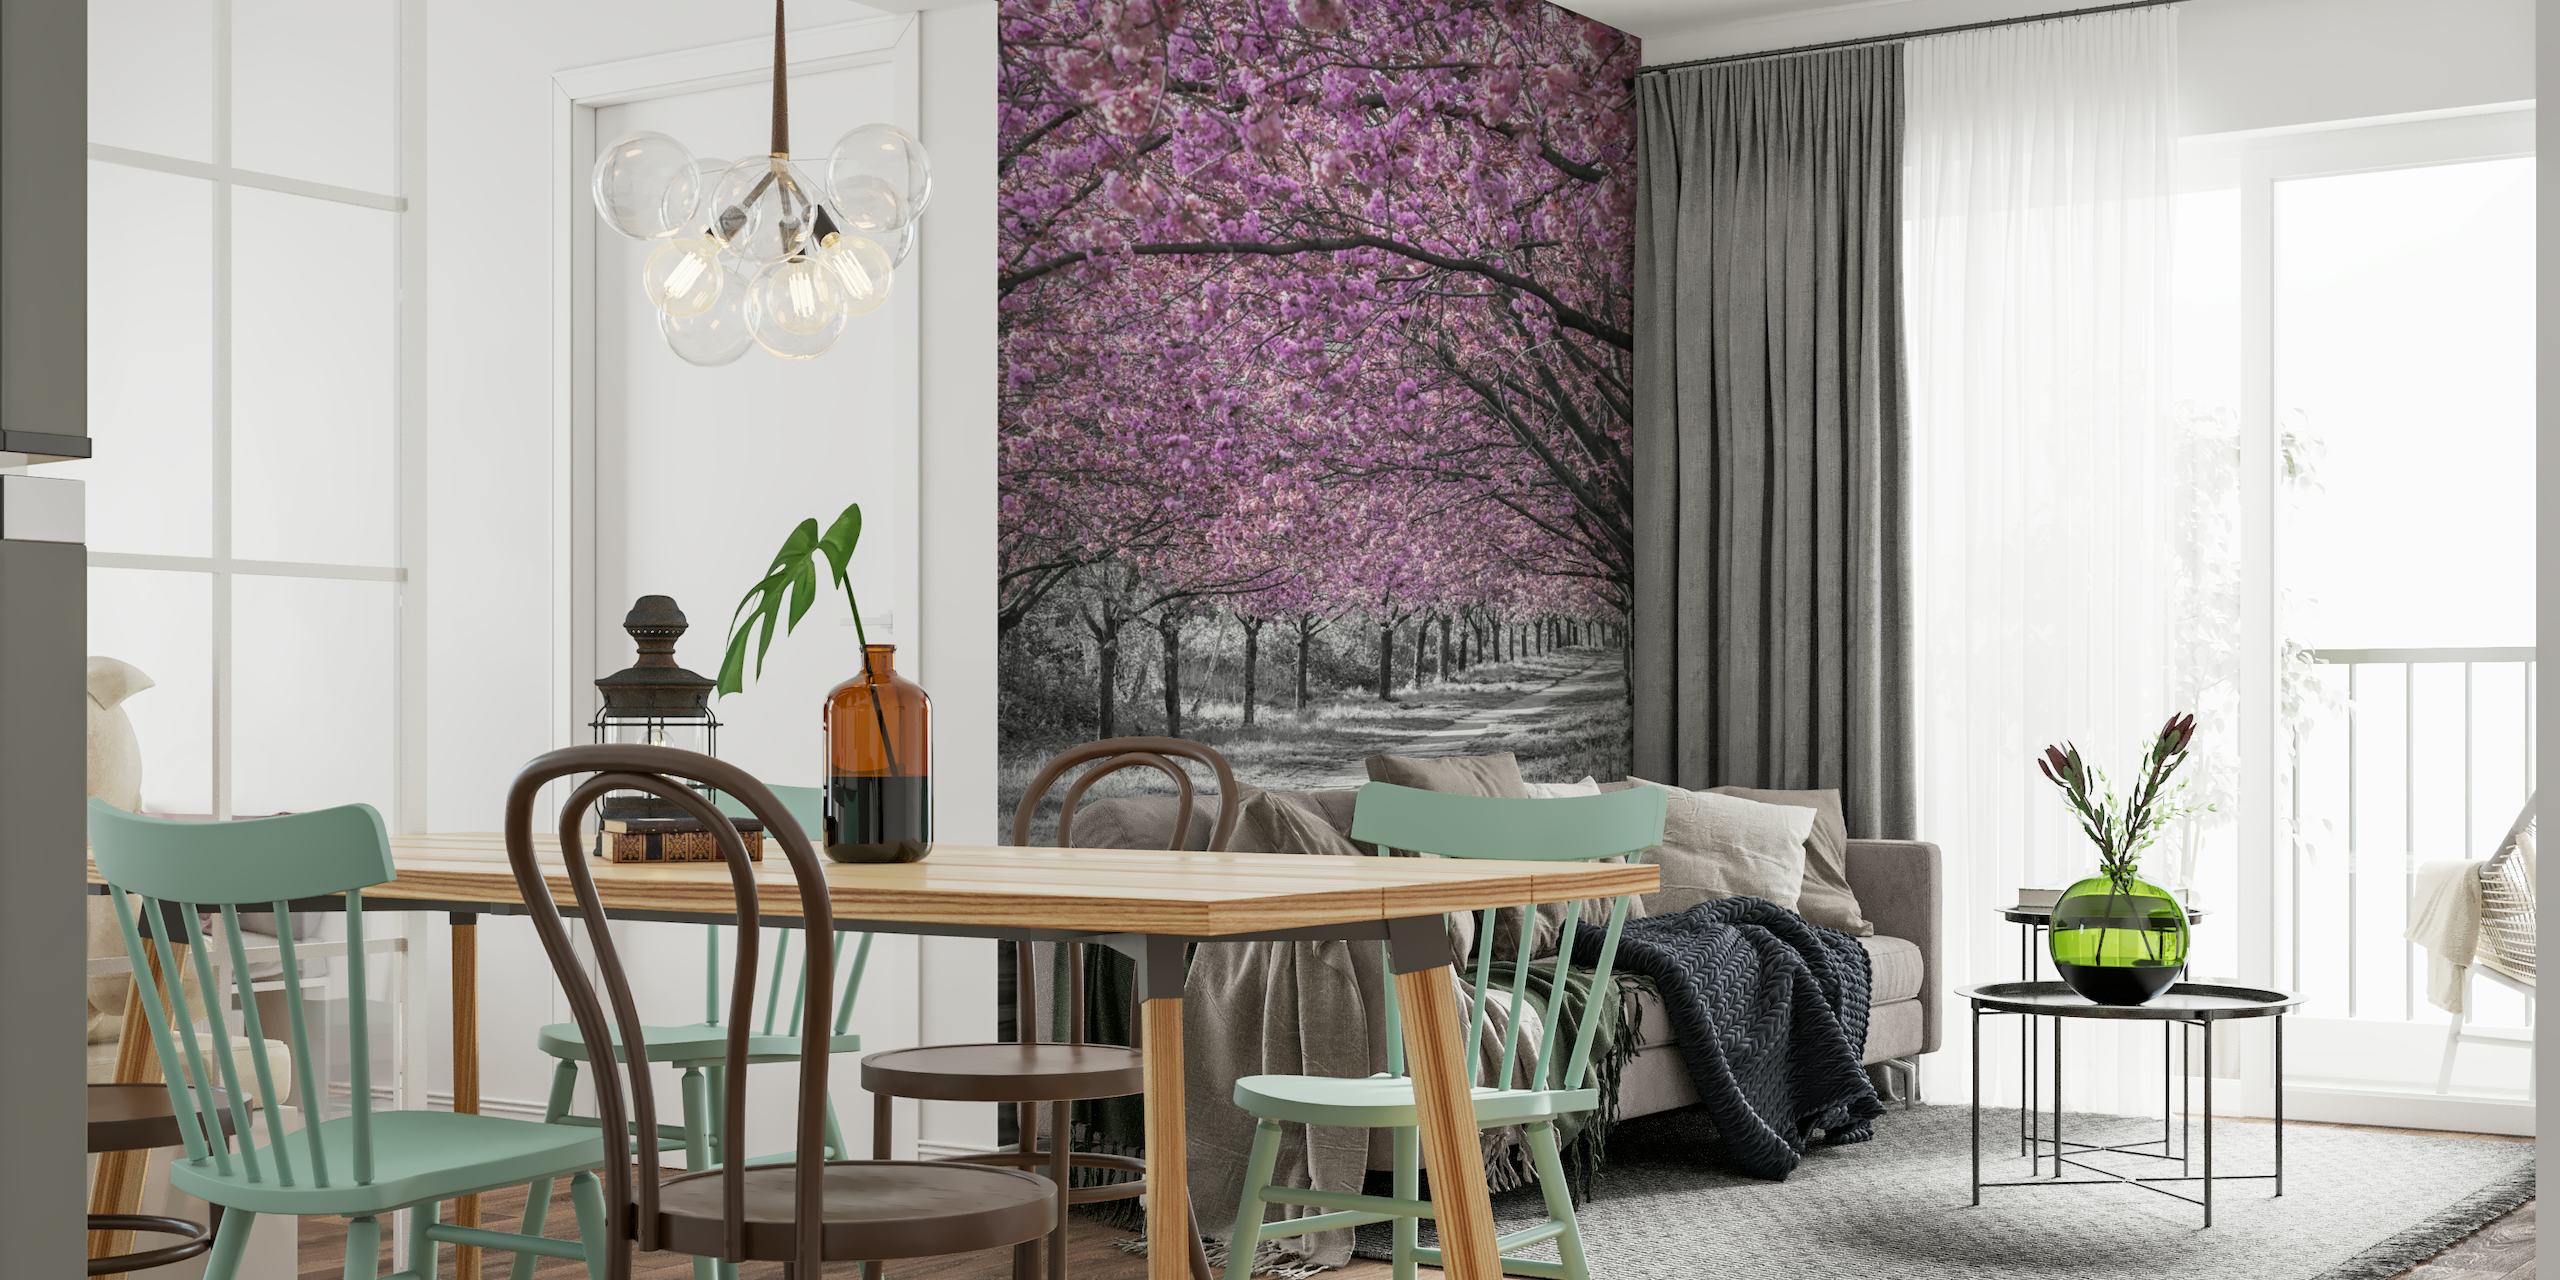 Cherry blossom path in pink wallpaper